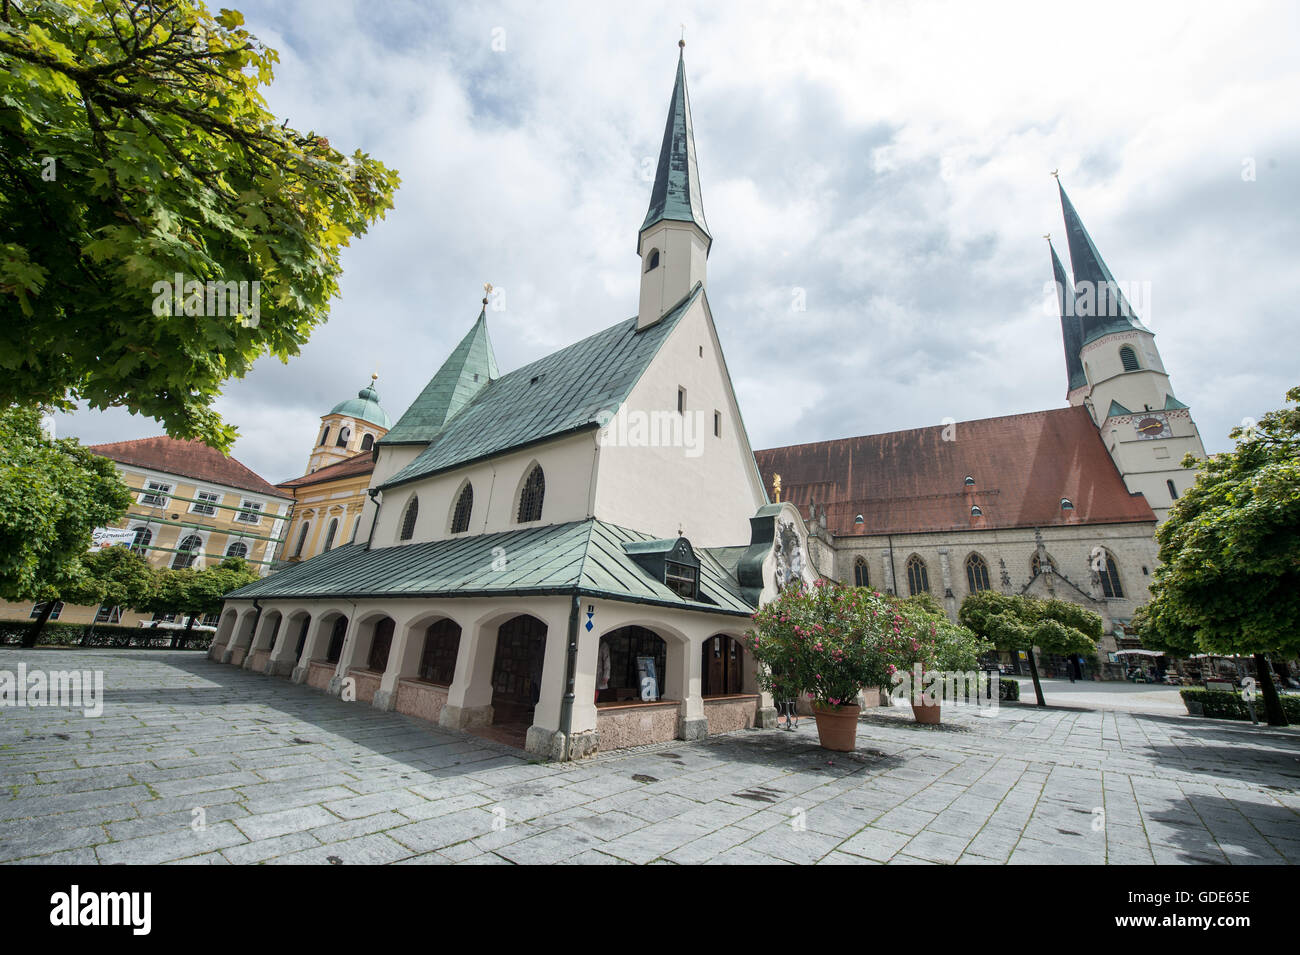 Altotting, Germany. 14th July, 2016. The chapel of grace (l) stands next to the Stiftspfarrkirche in the pilgramage destination of Altotting, Germany, 14 July 2016. Photo: Armin Weigel/dpa/Alamy Live News Stock Photo